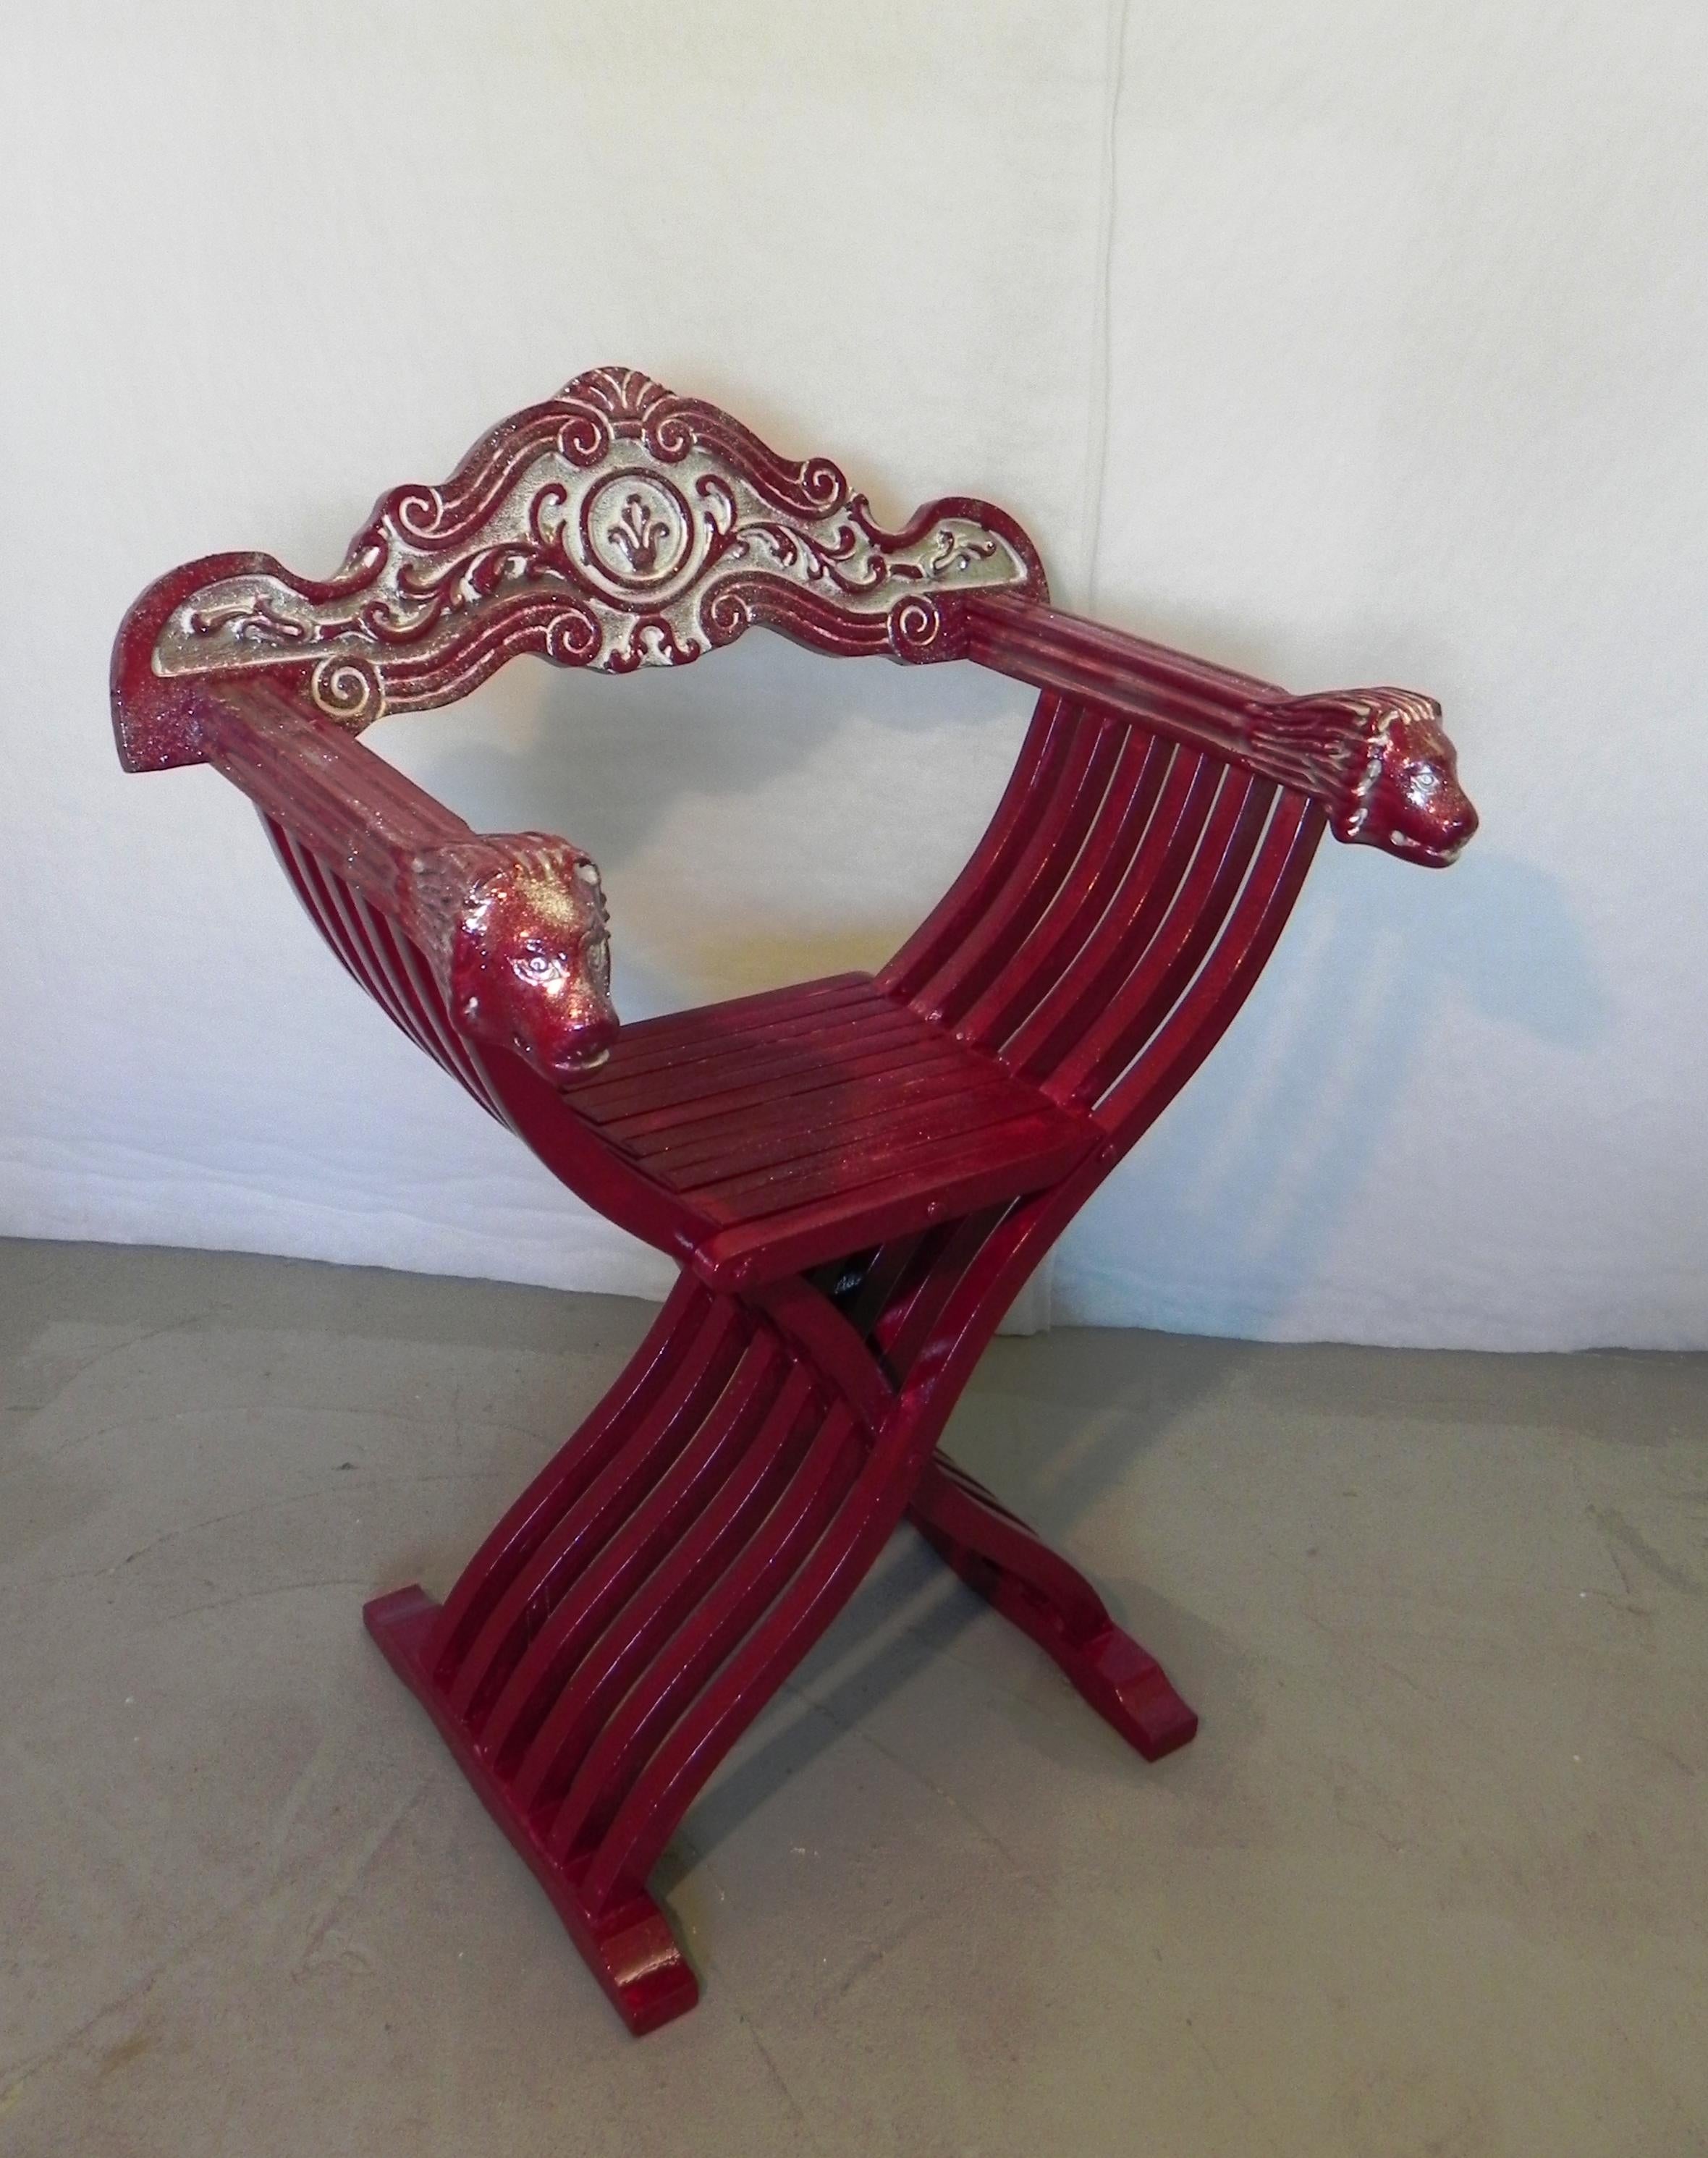 savonarola Red Throne chair. built in the 1960s in the renaissance style. armrests with carved lion heads. back carved with renaissance decorative motifs. the chair originally walnut color, was repainted for the purpose of use in a theatrical piece,